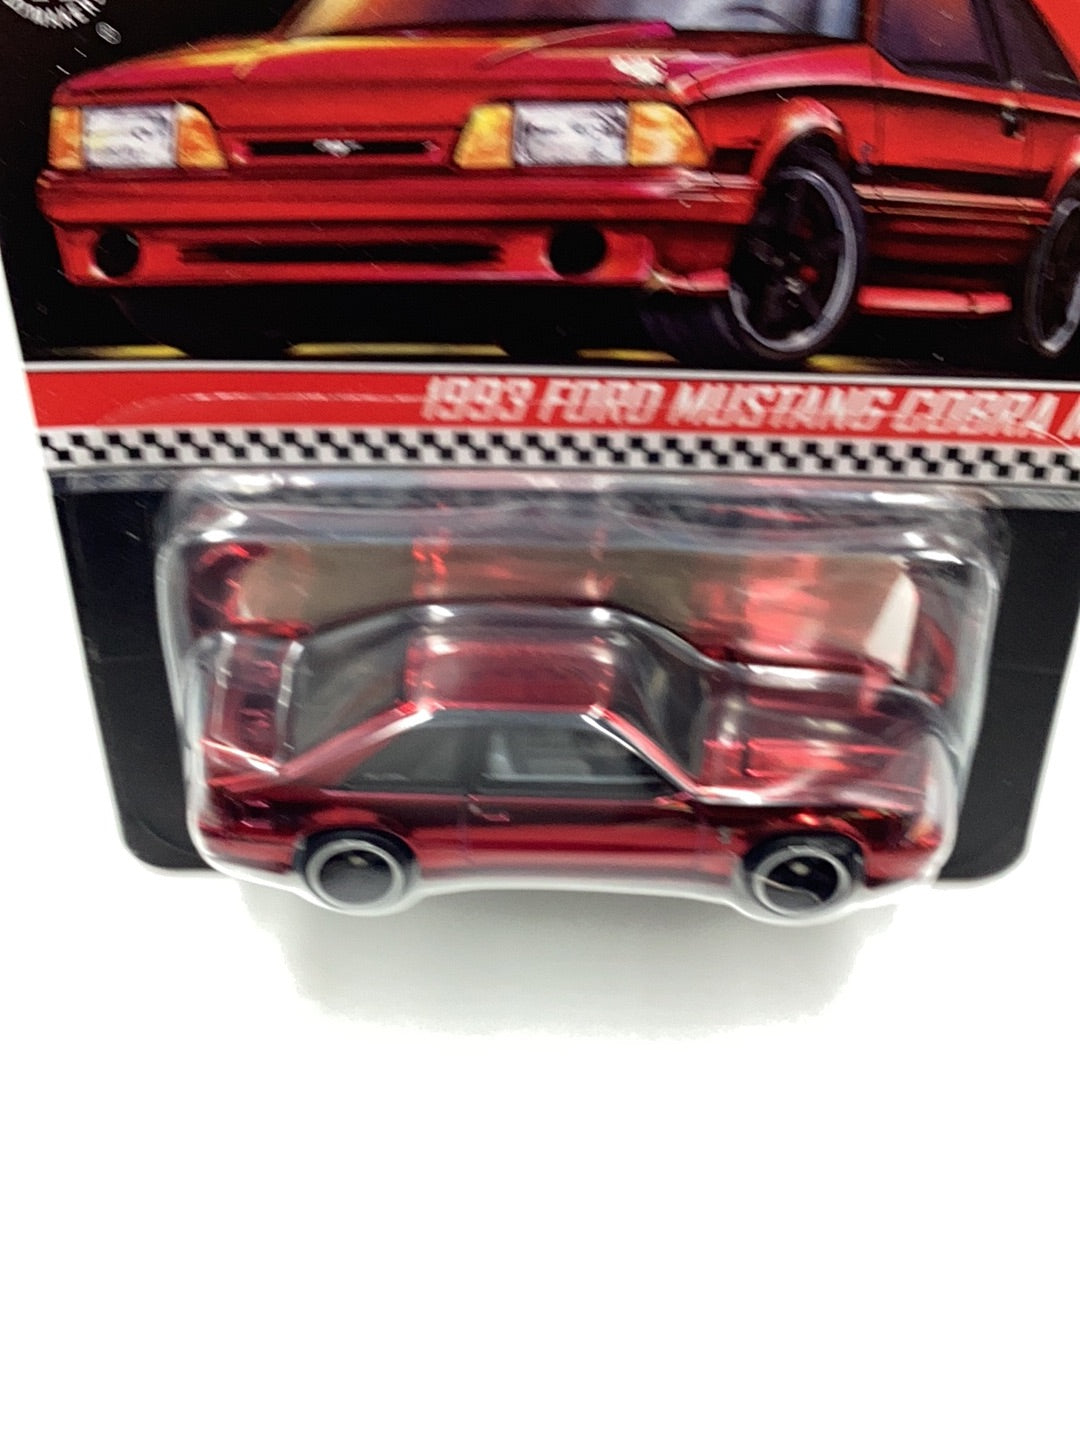 Hot wheels redline club 1993 Ford Mustang Cobra R with protector